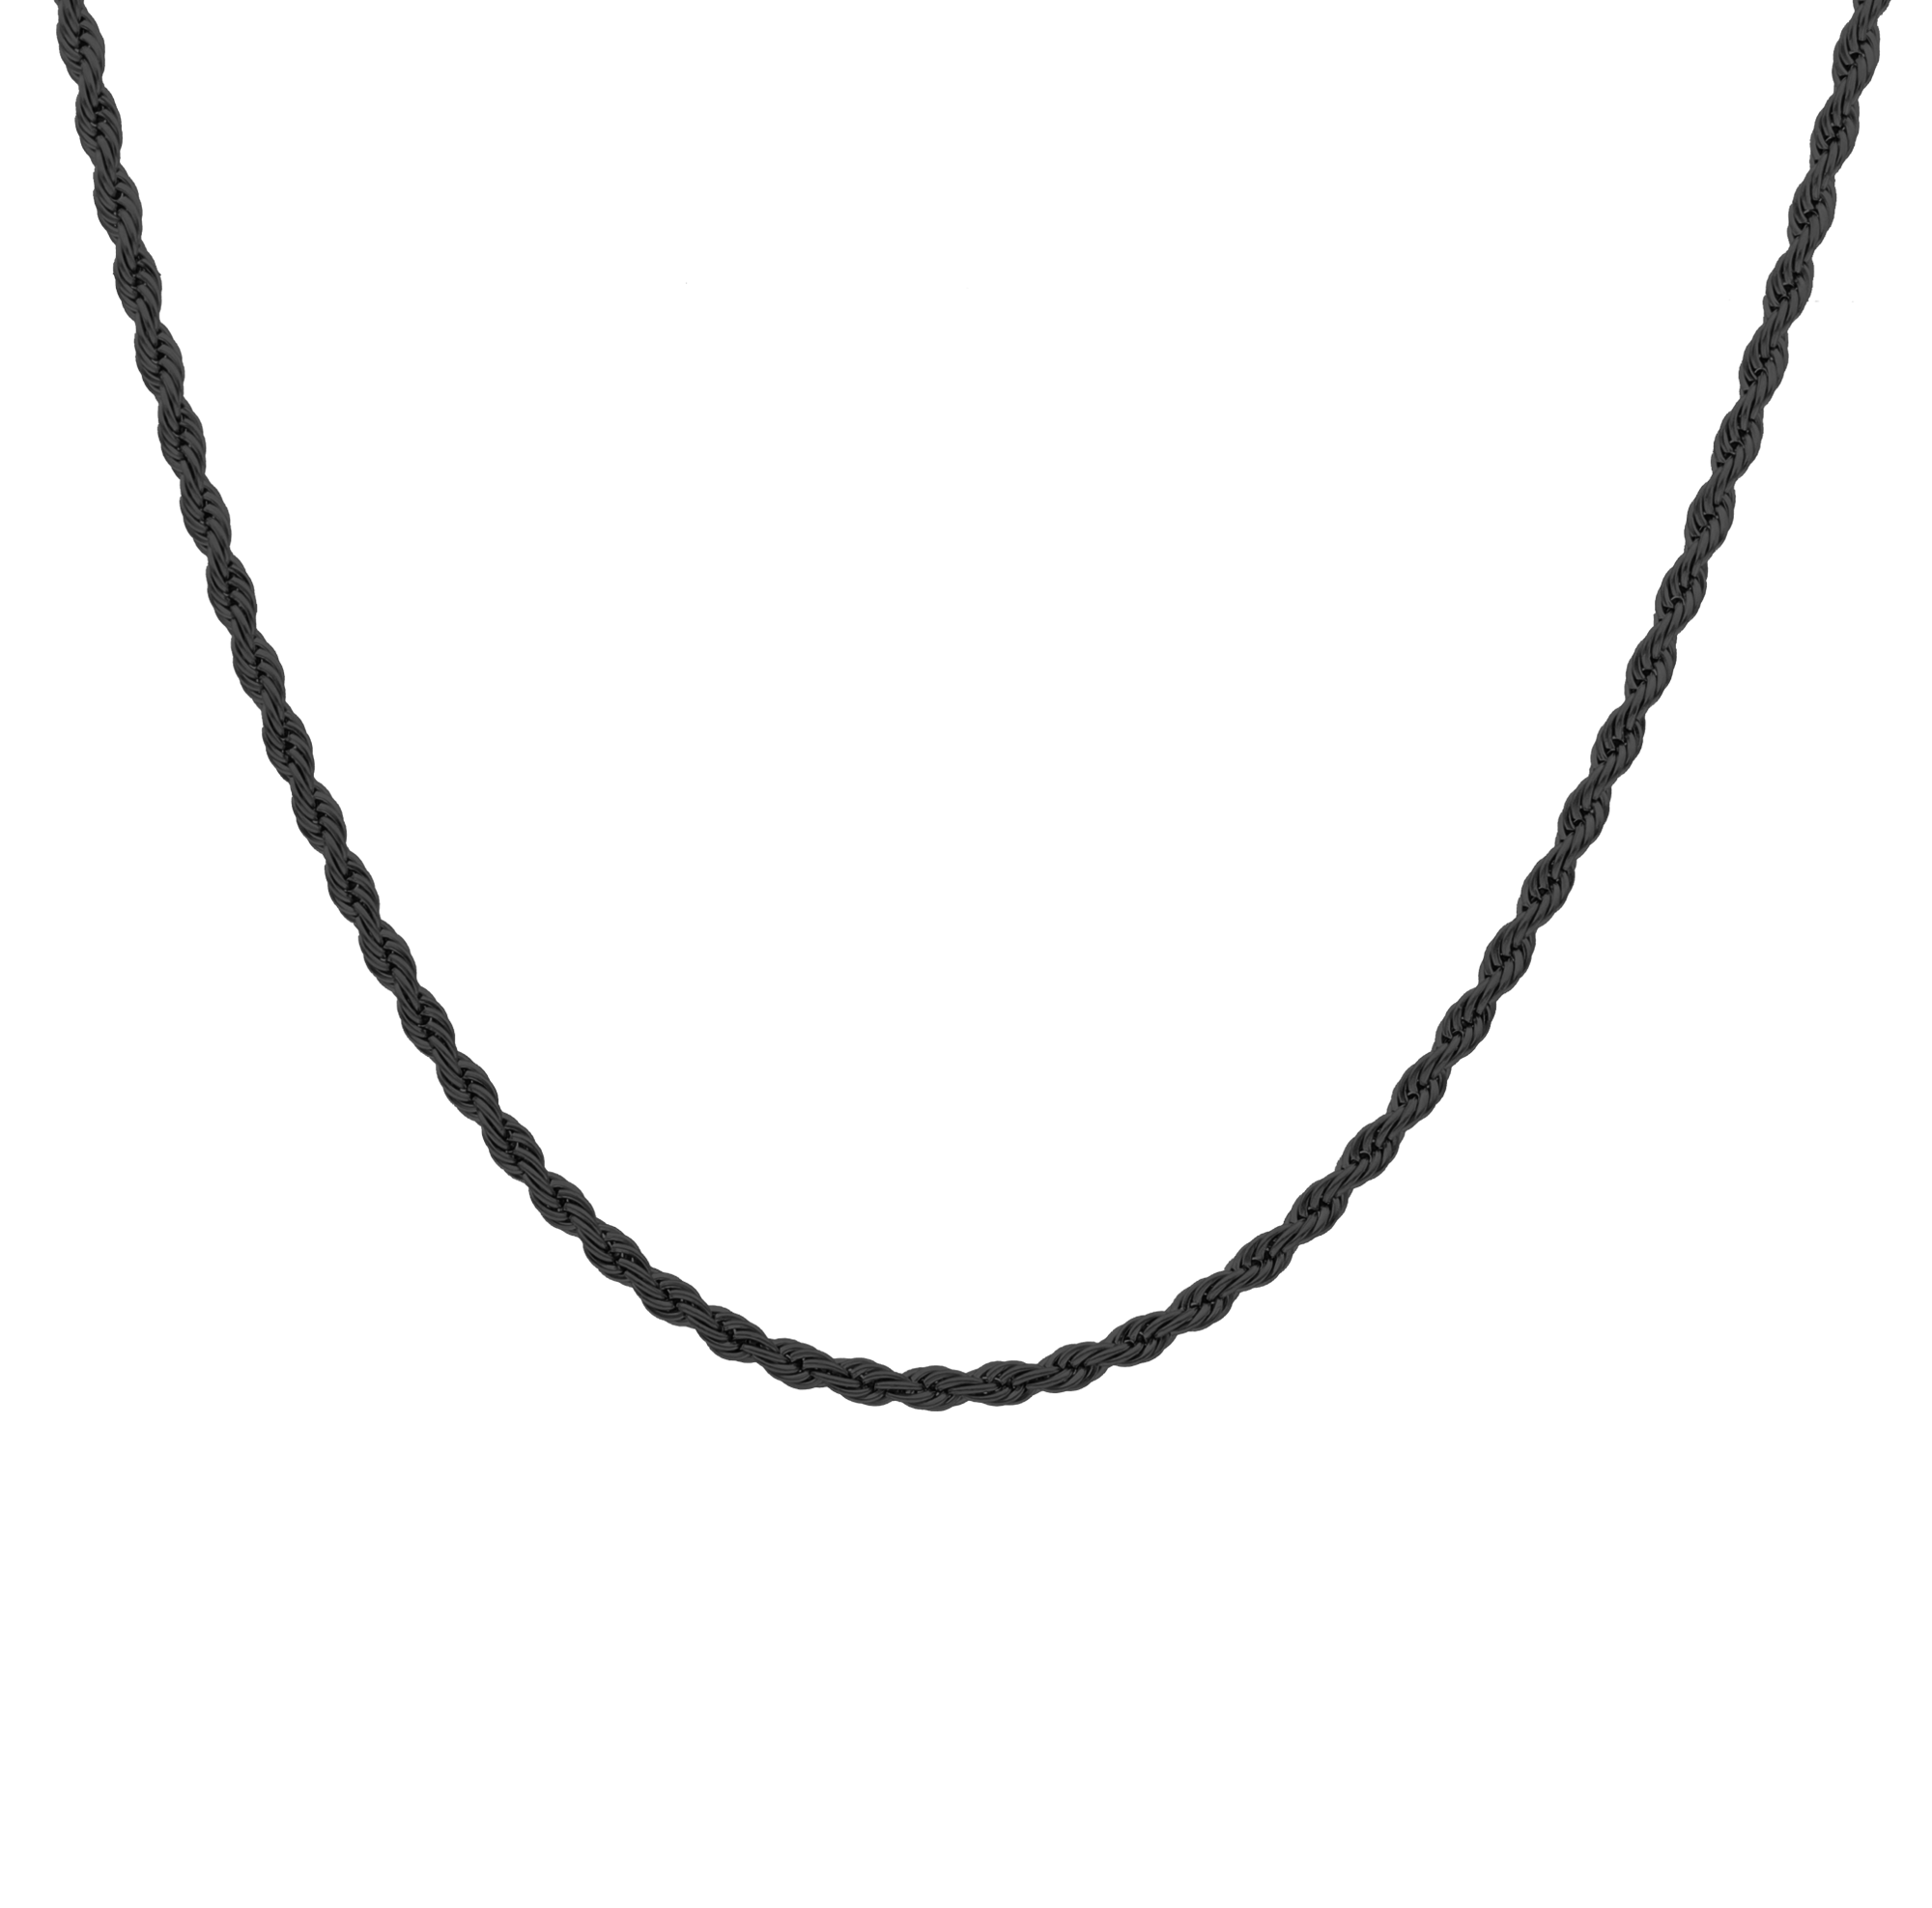 Baby Don men's necklace by Five Jwlry, crafted from a thin 2.5mm French rope twisted chain in black-colored, water-resistant 316L stainless steel. Available in sizes 45cm, 50cm, and 55cm. Hypoallergenic with a 2-year warranty.